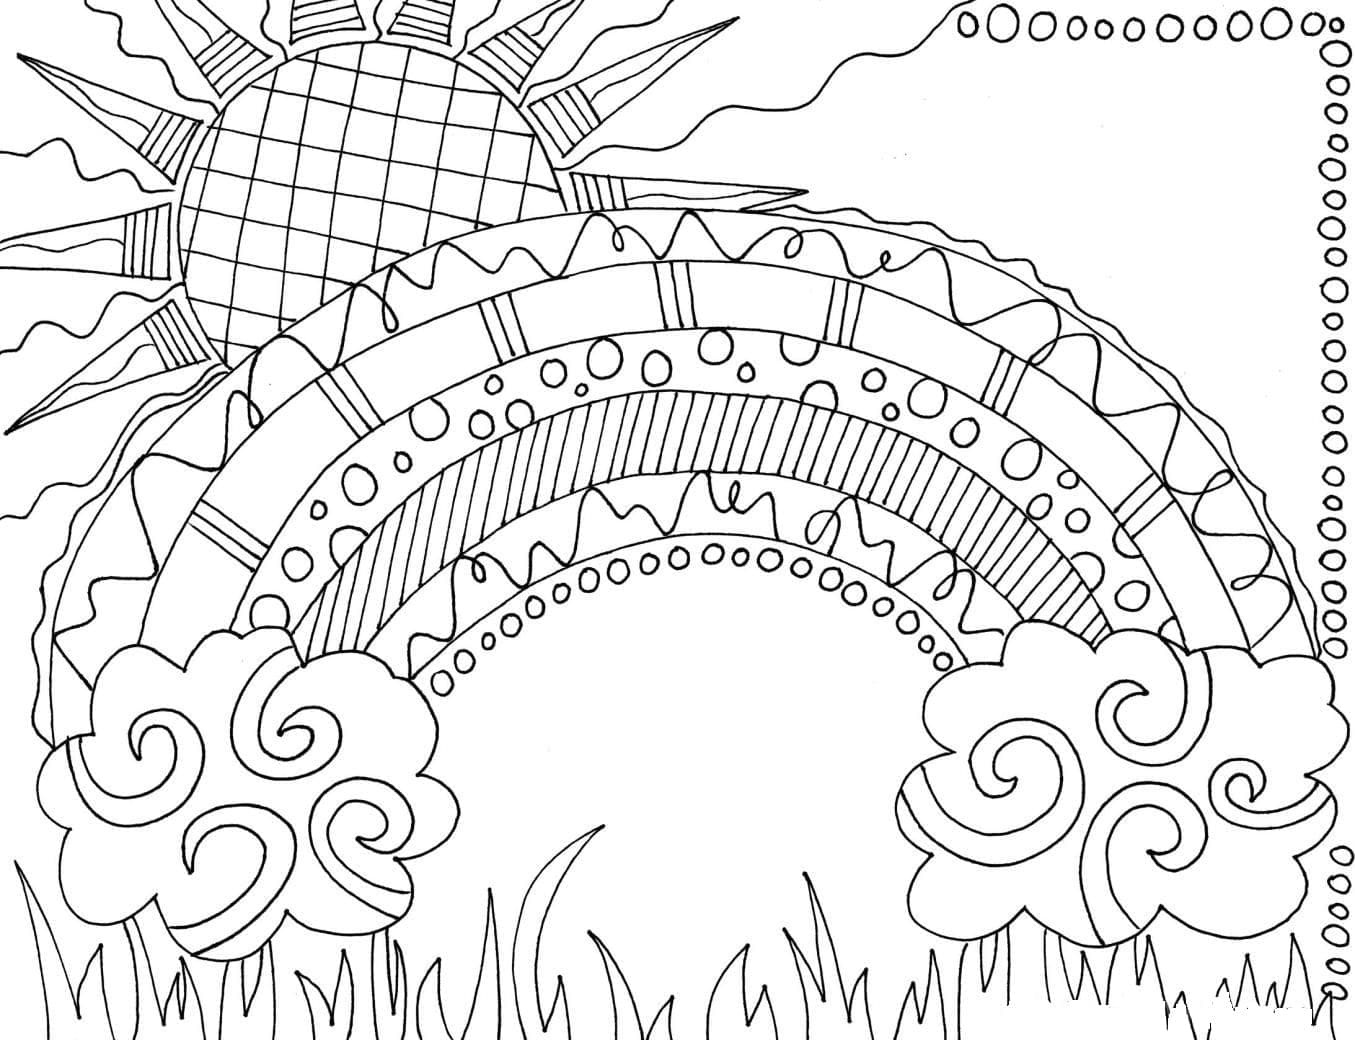 hard-and-difficult-to-color-adult-rainbow-coloring-pages-for-stress